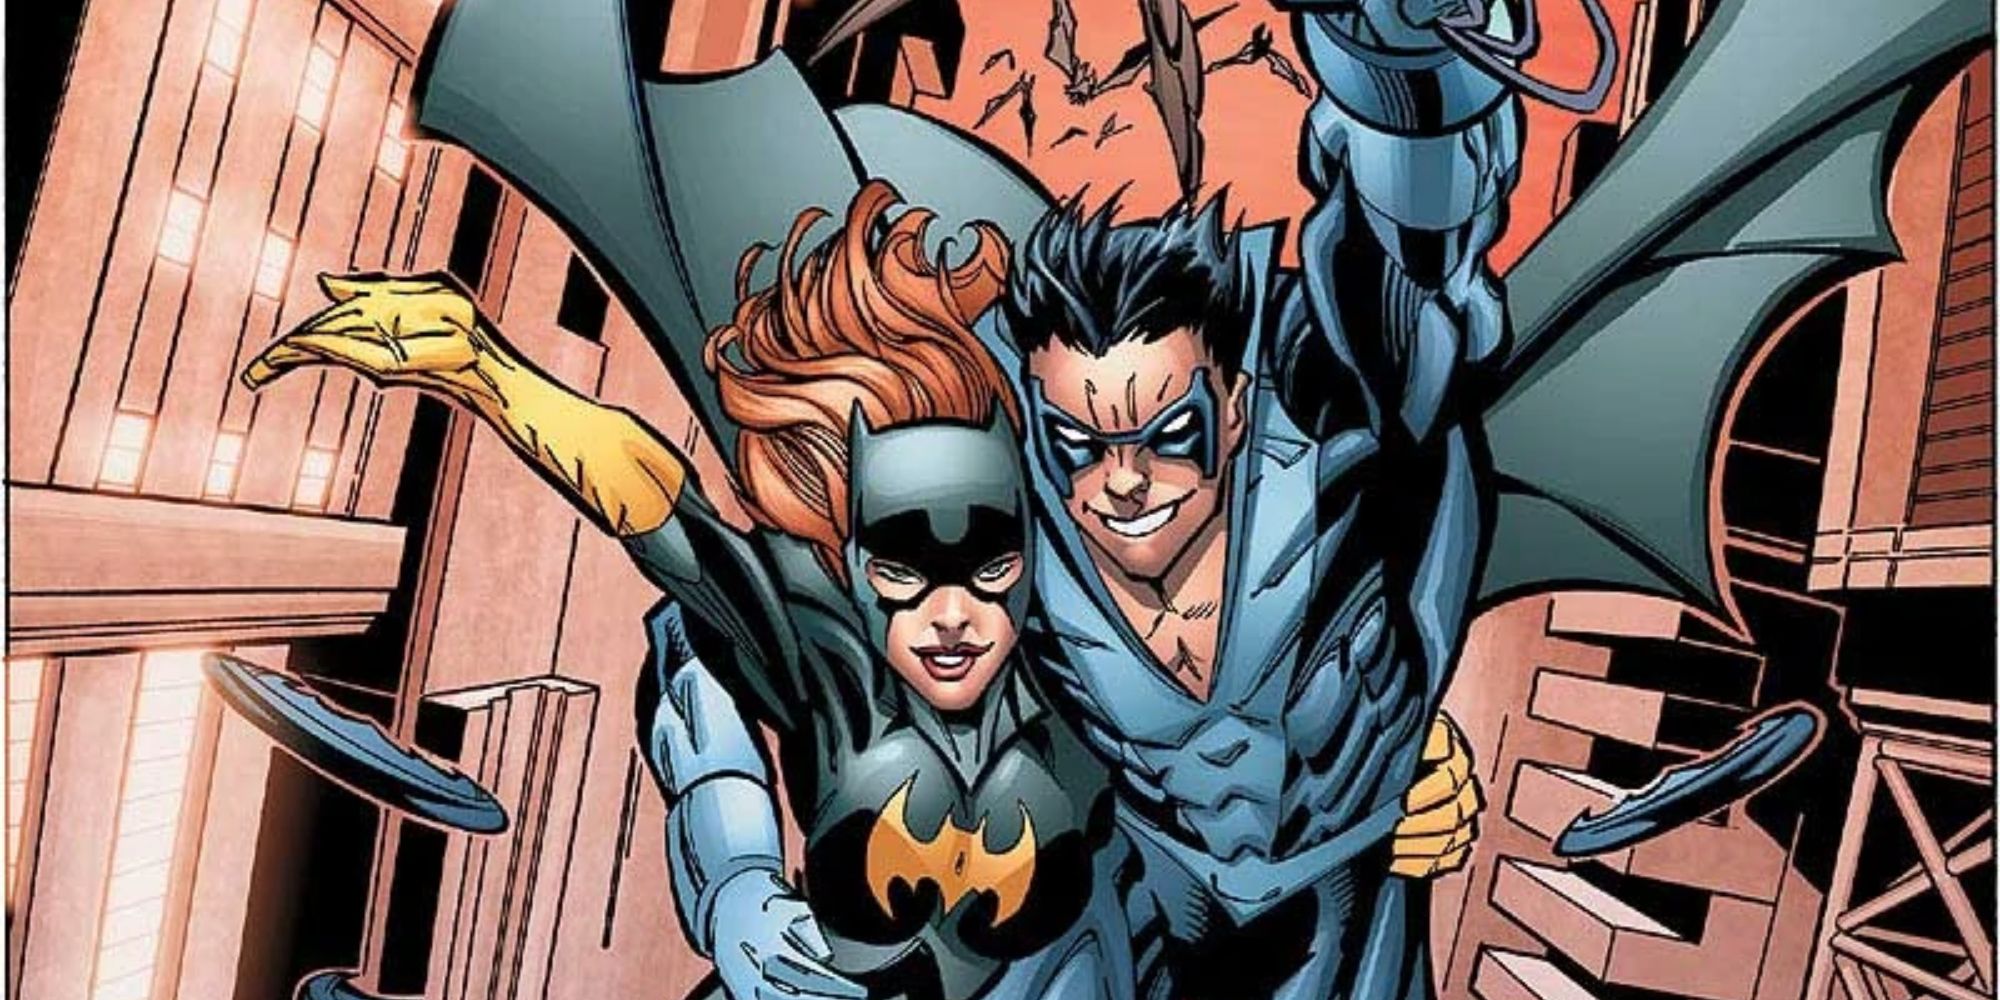 Nightwing swinging through a city with Batgirl